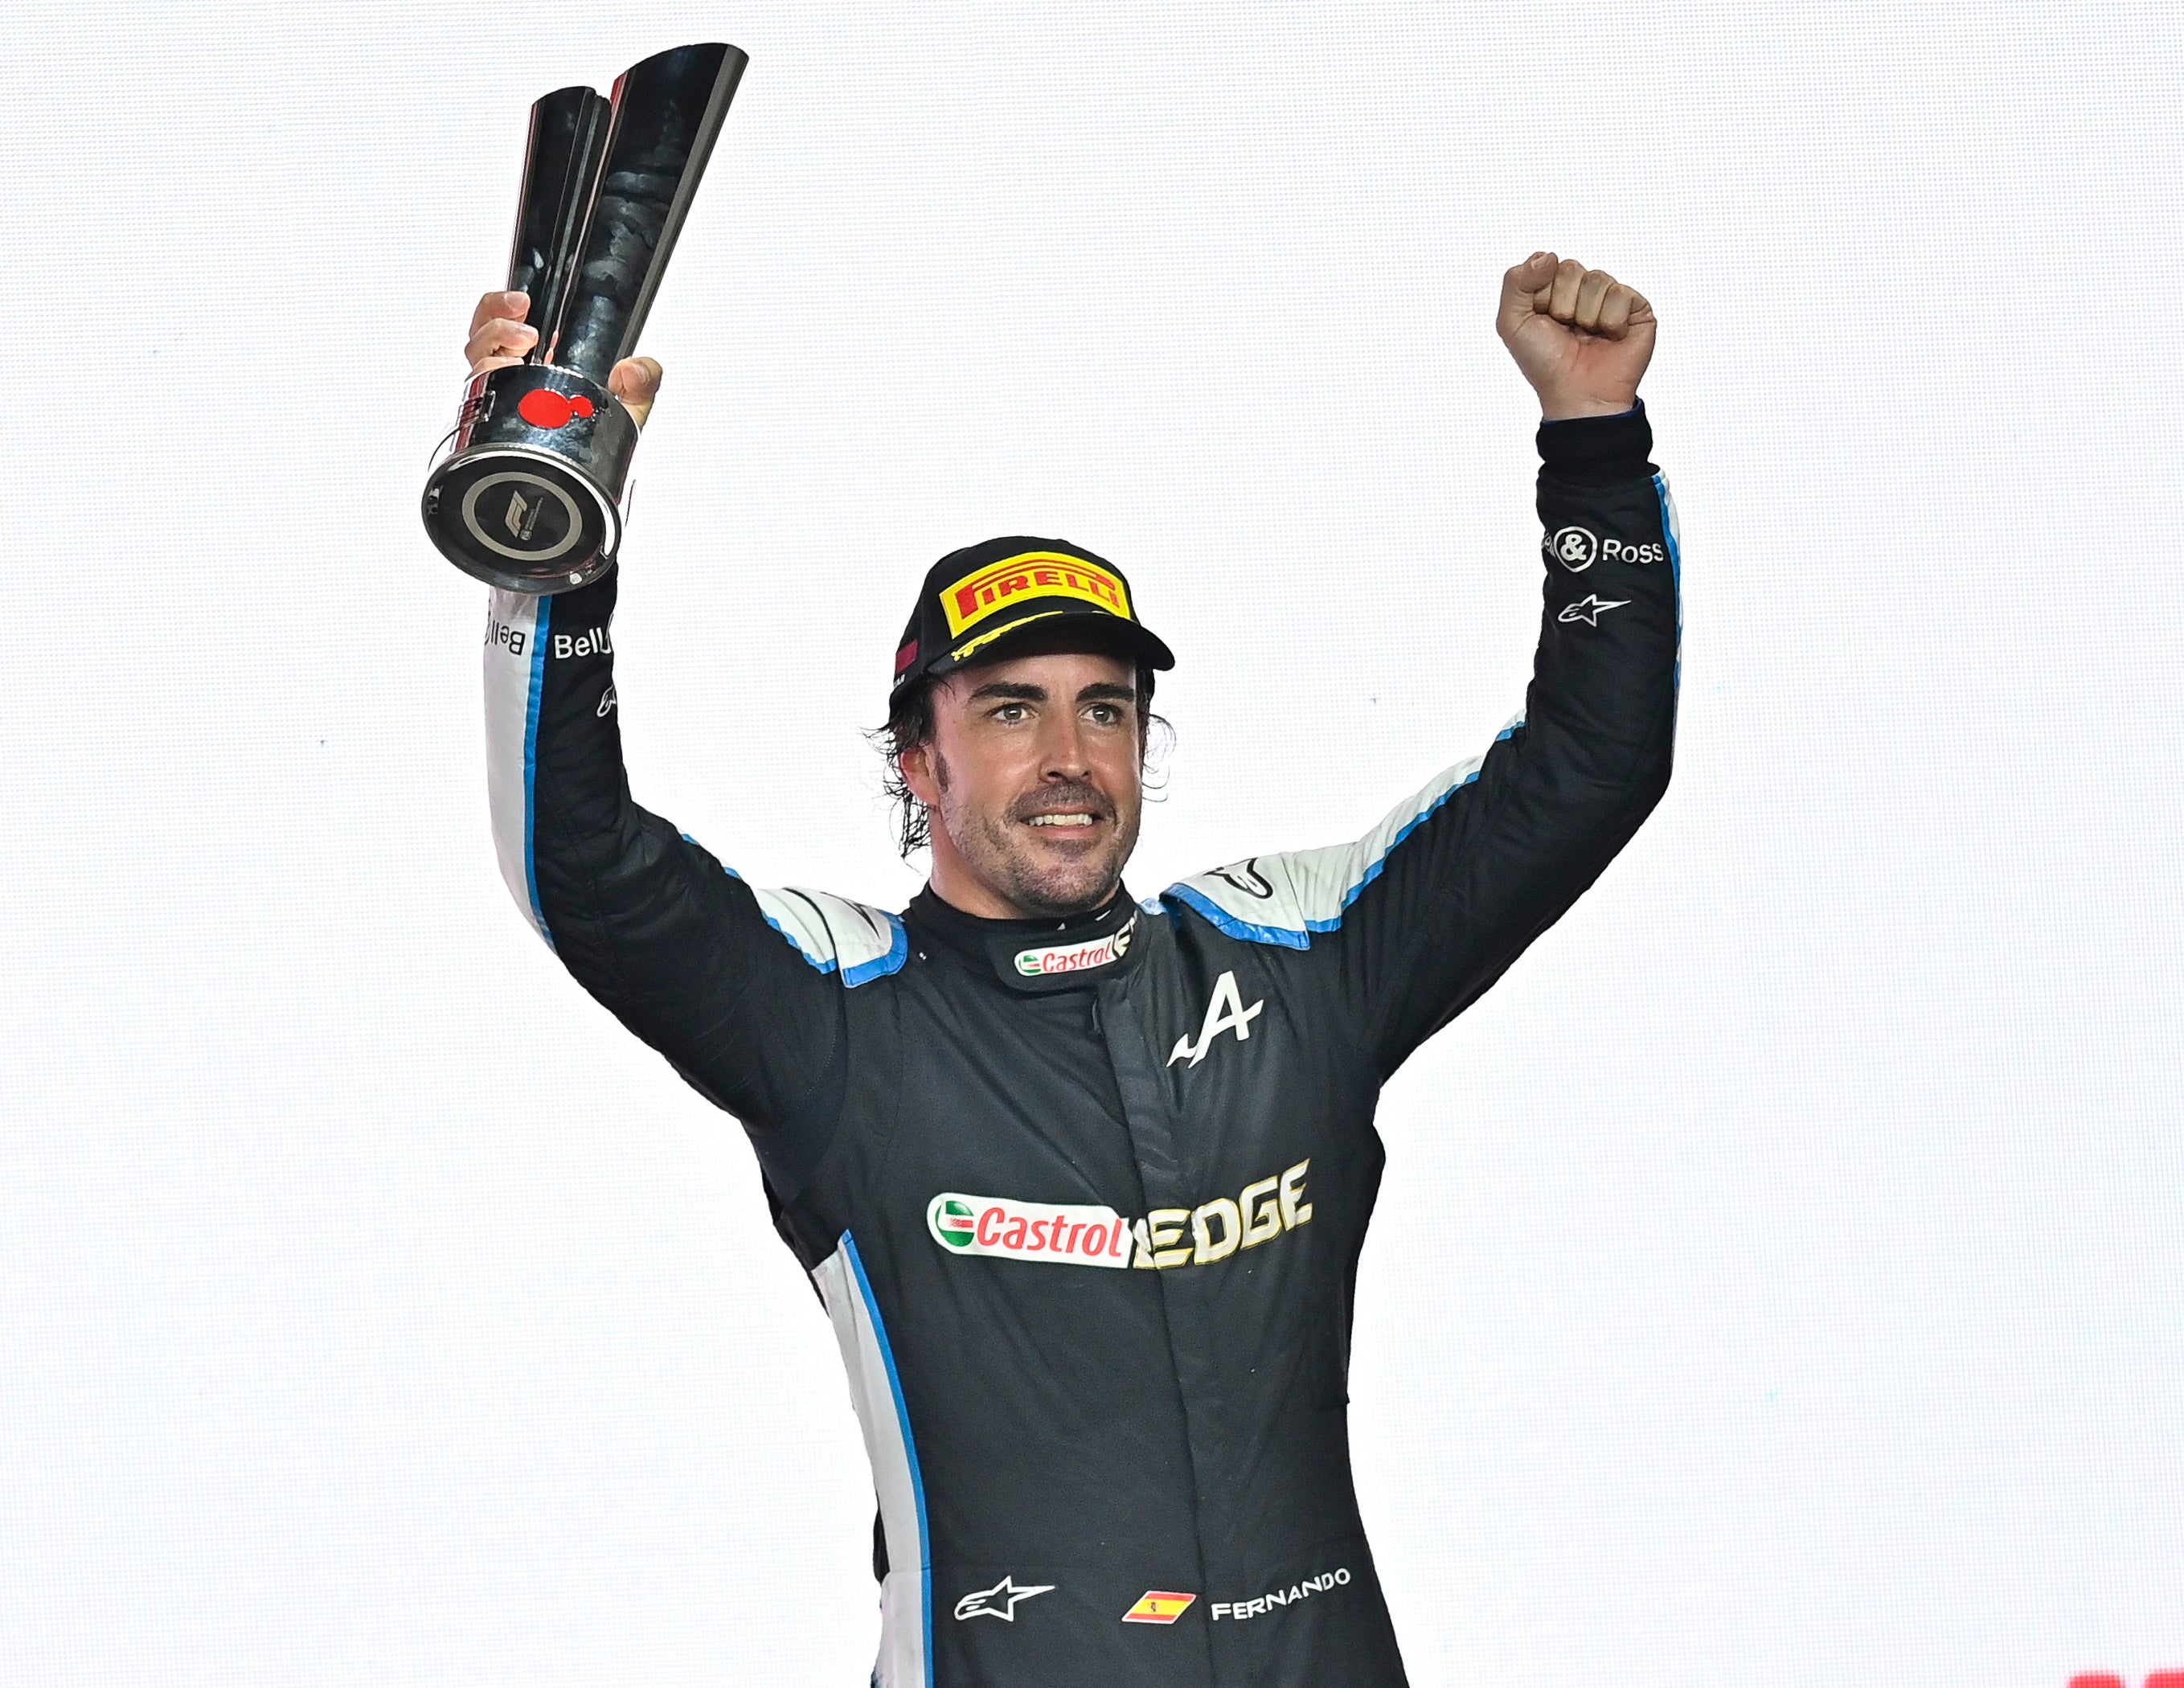 Alonso was delighted after holding off a challenge from Sergio Perez to take third